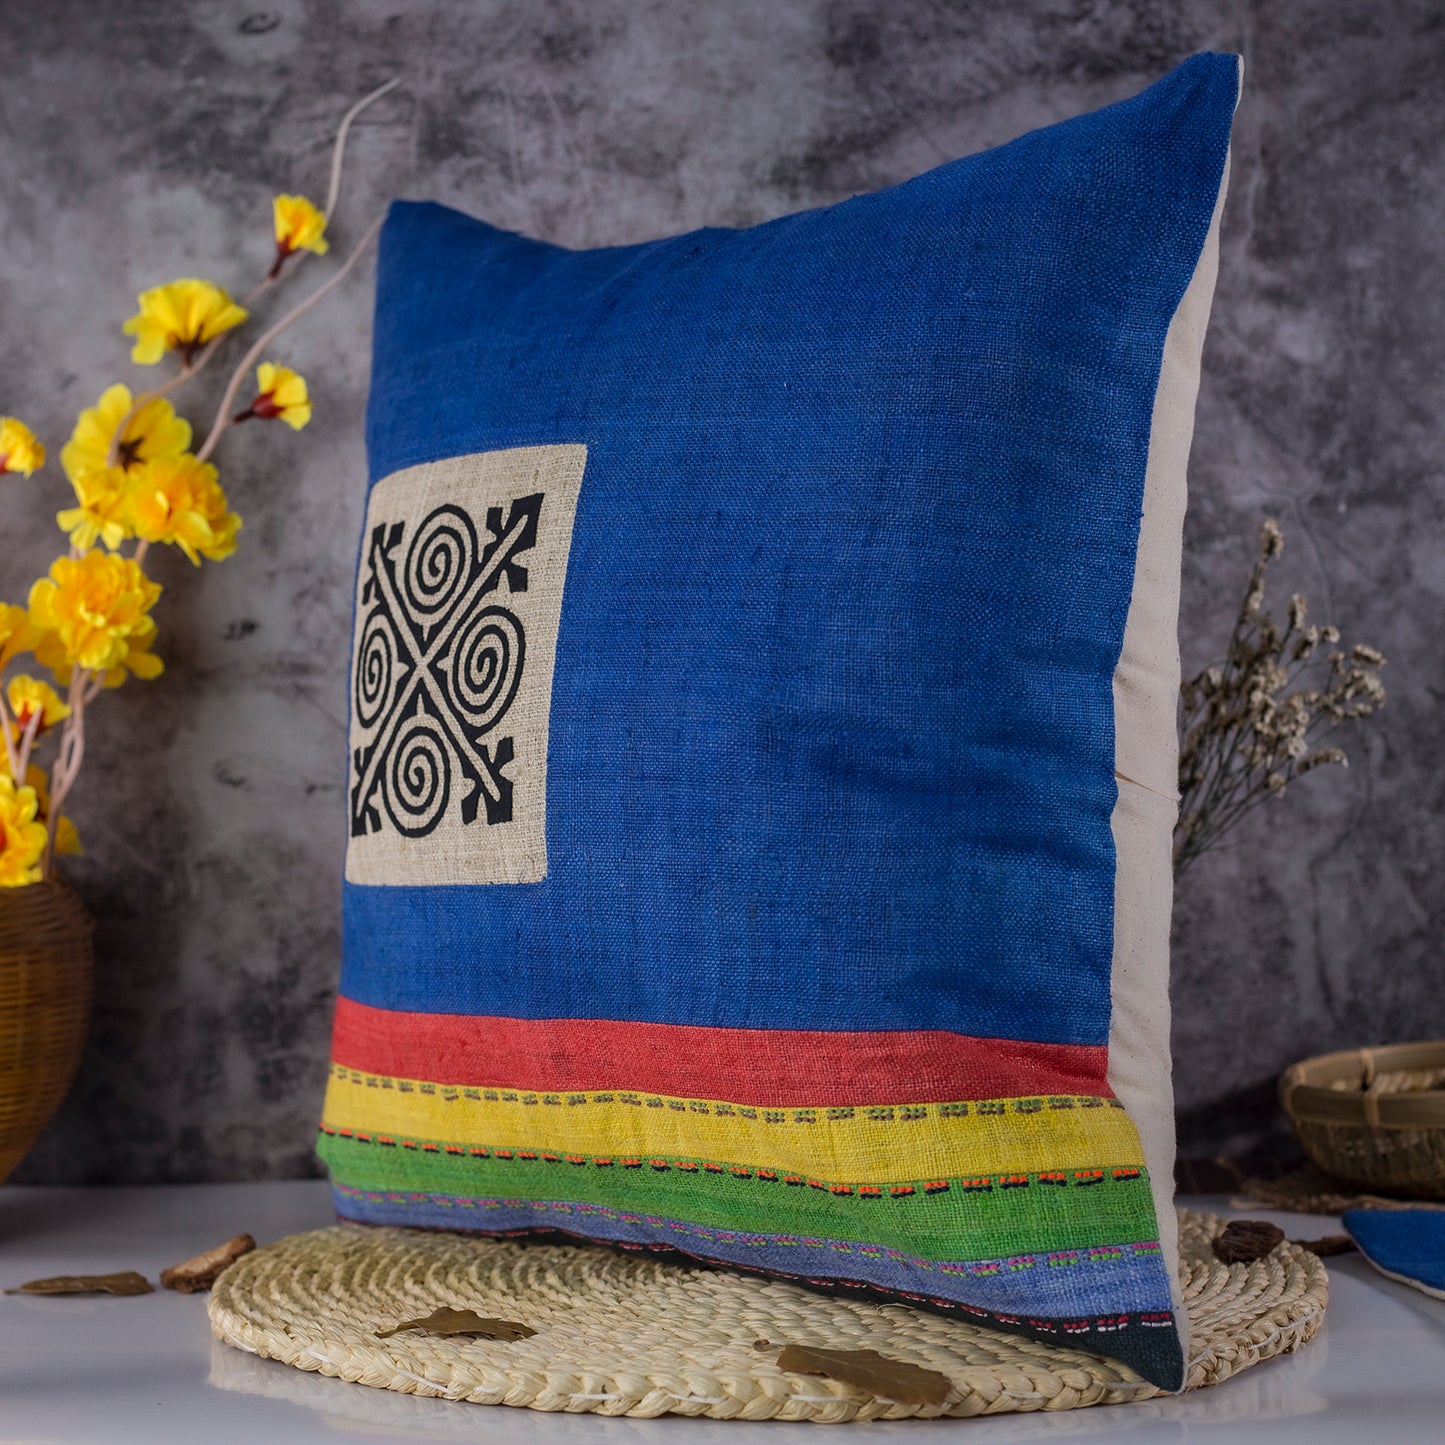 Catalina Blue Hemp Cushion Cover with stripes in different colors, hand-stitched pattern in black and white